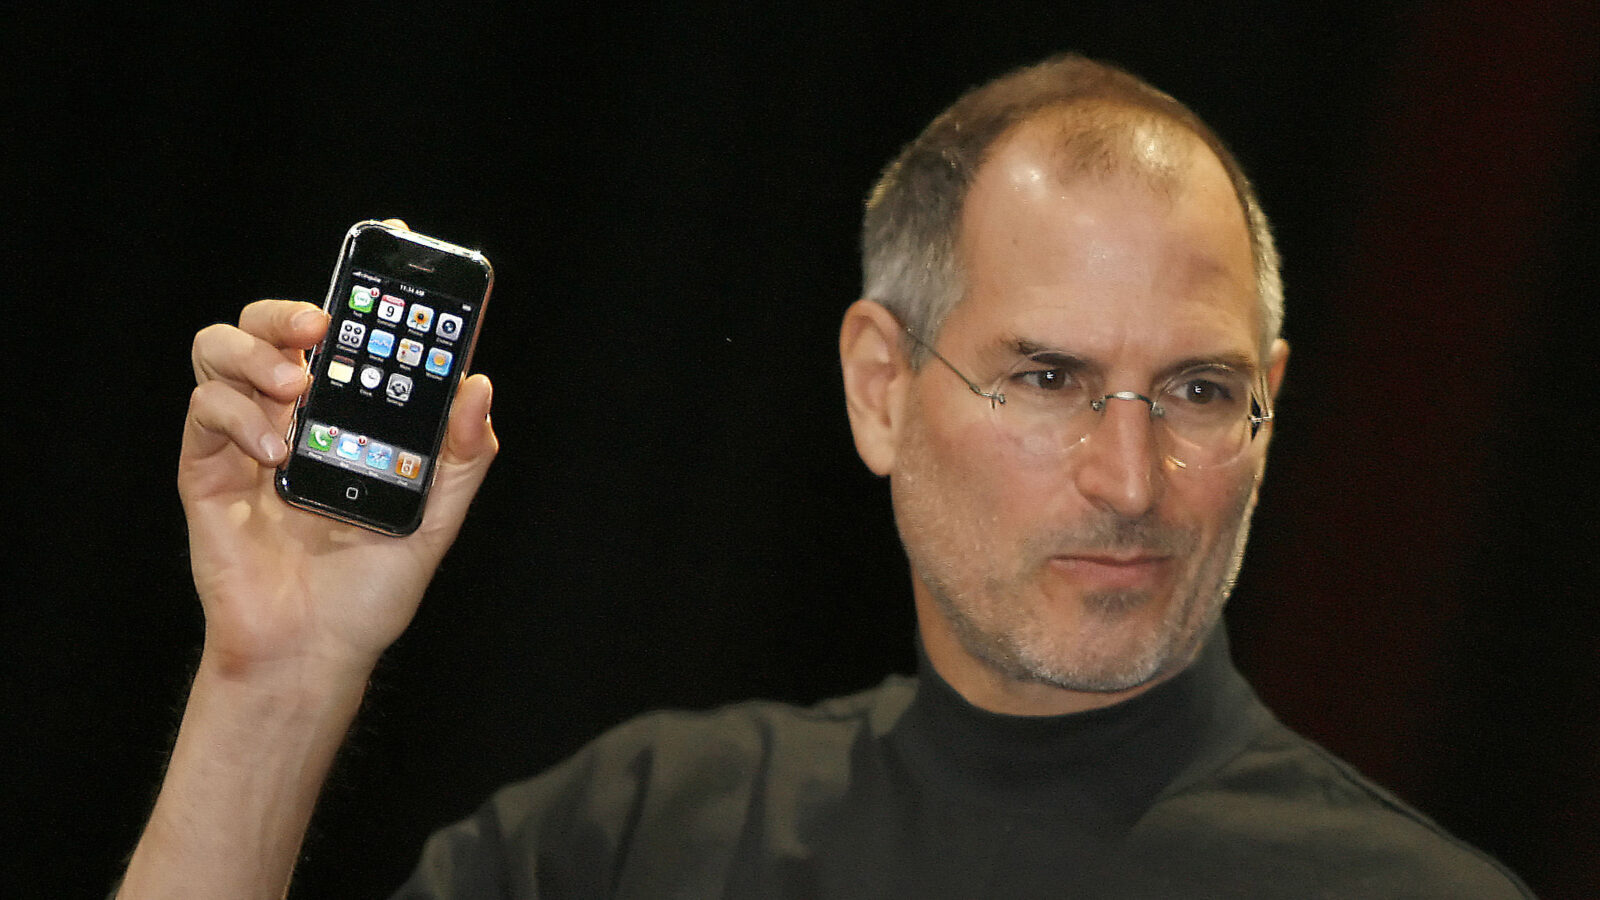 Apple founder Steve Jobs died 11 years ago today